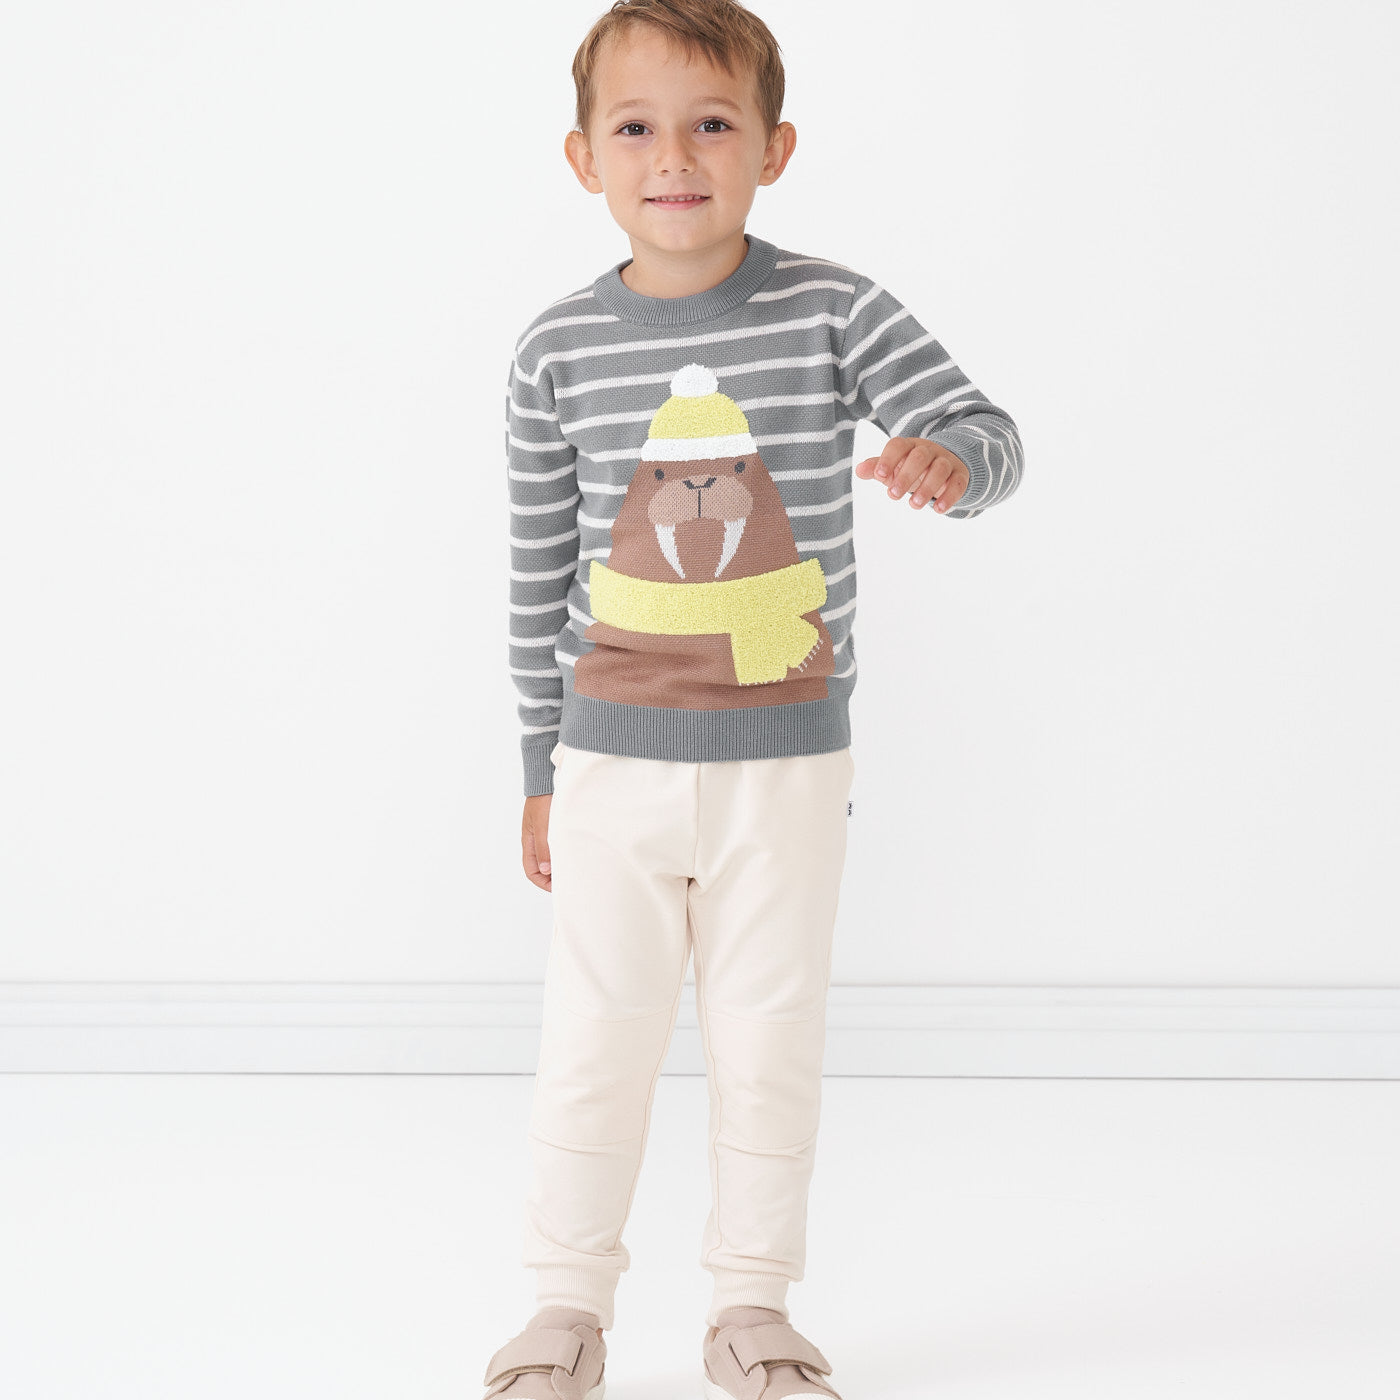 Child wearing Cream Joggers and coordinating Walrus knit sweater